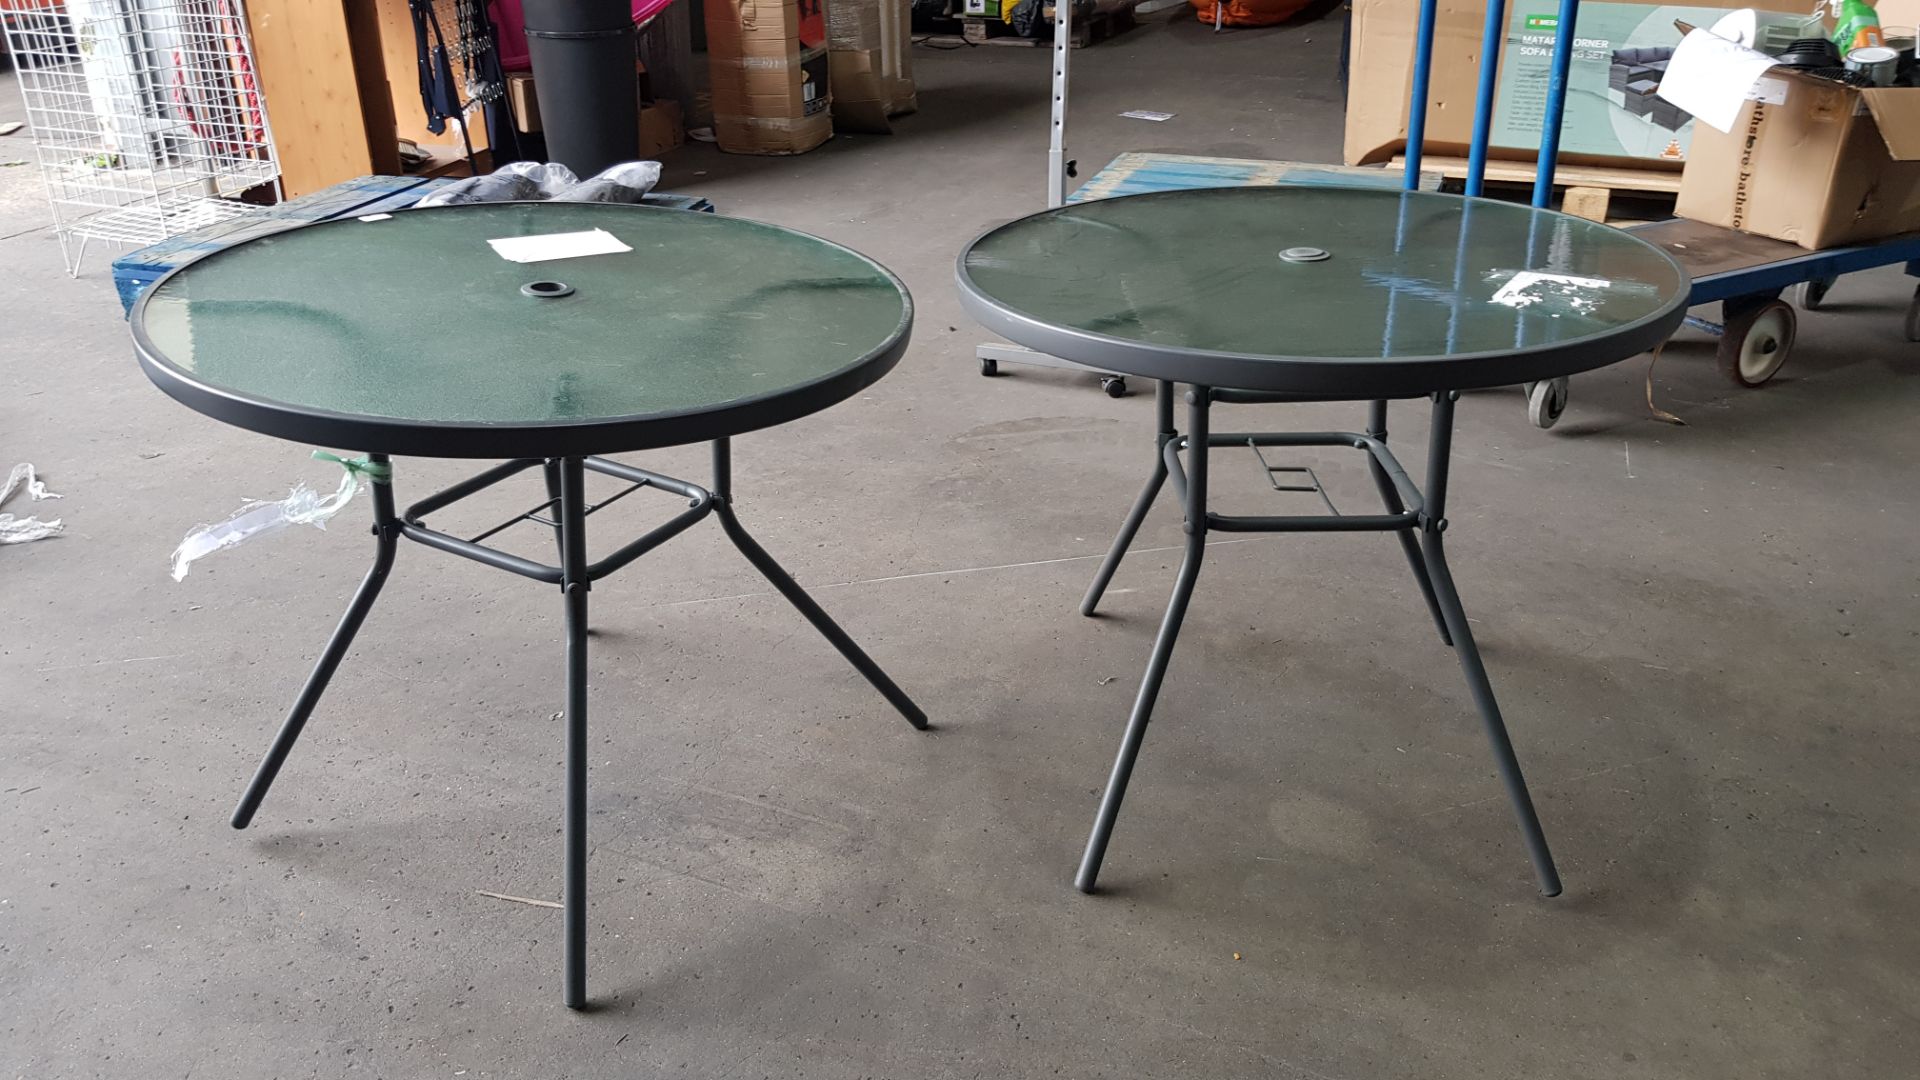 (R2K) 2x Andorra Round Table With 2x Parasol. RRP £74.99. Both Tables Have Been Used And Constructe - Image 5 of 5